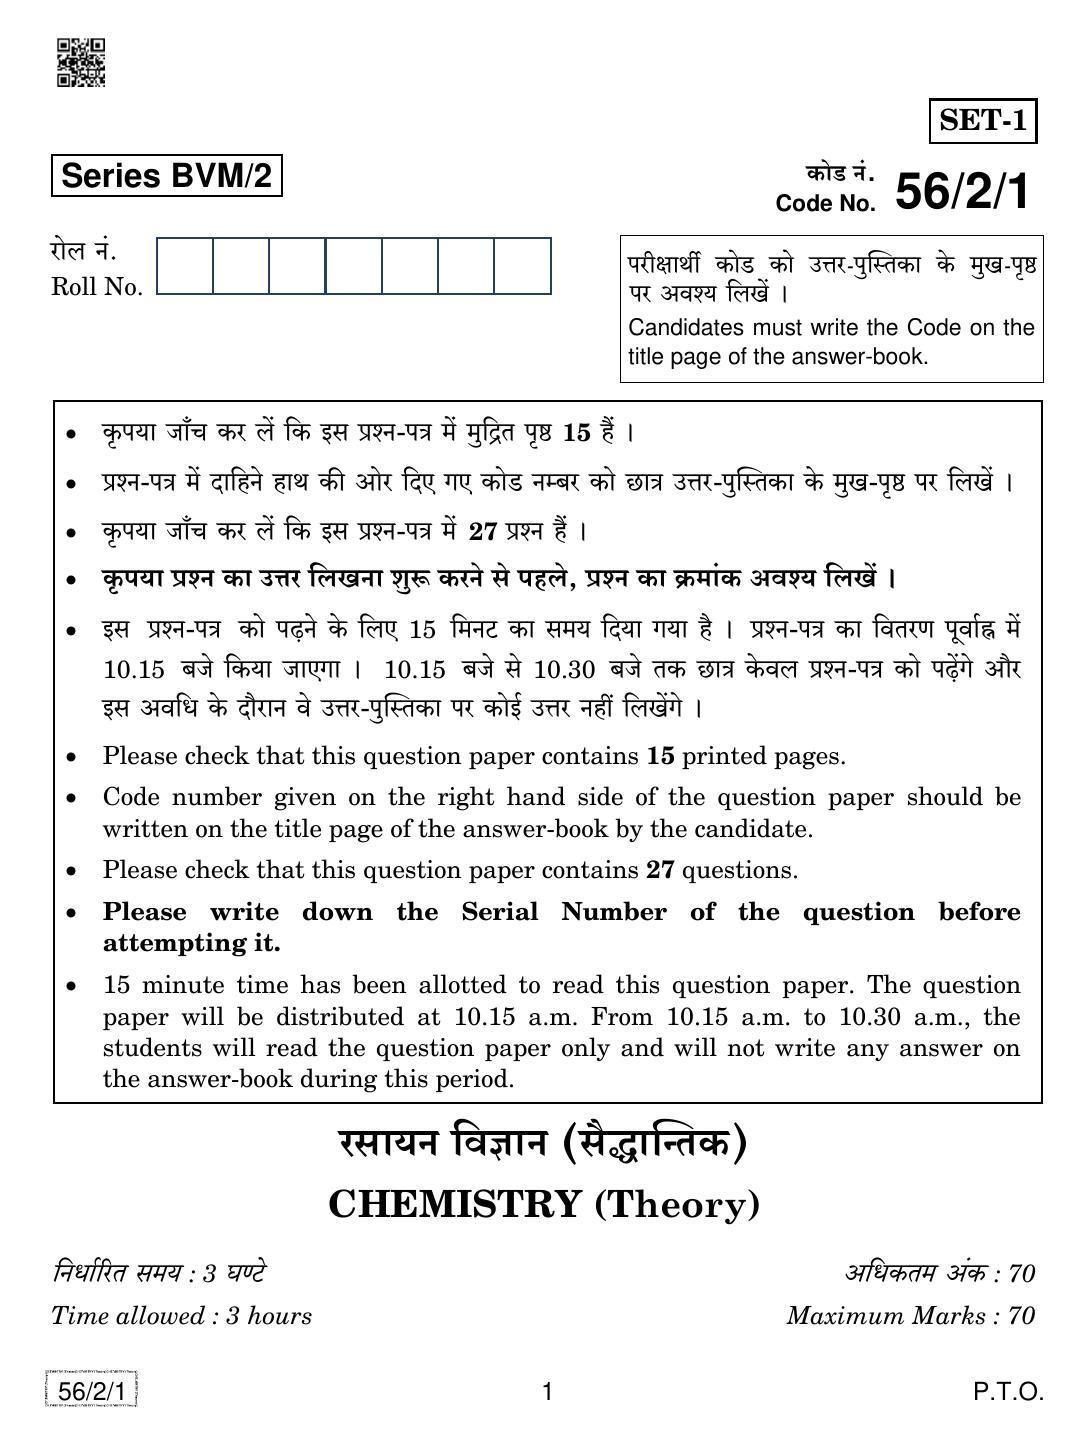 CBSE Class 12 56-2-1 Chemistry 2019 Question Paper - Page 1